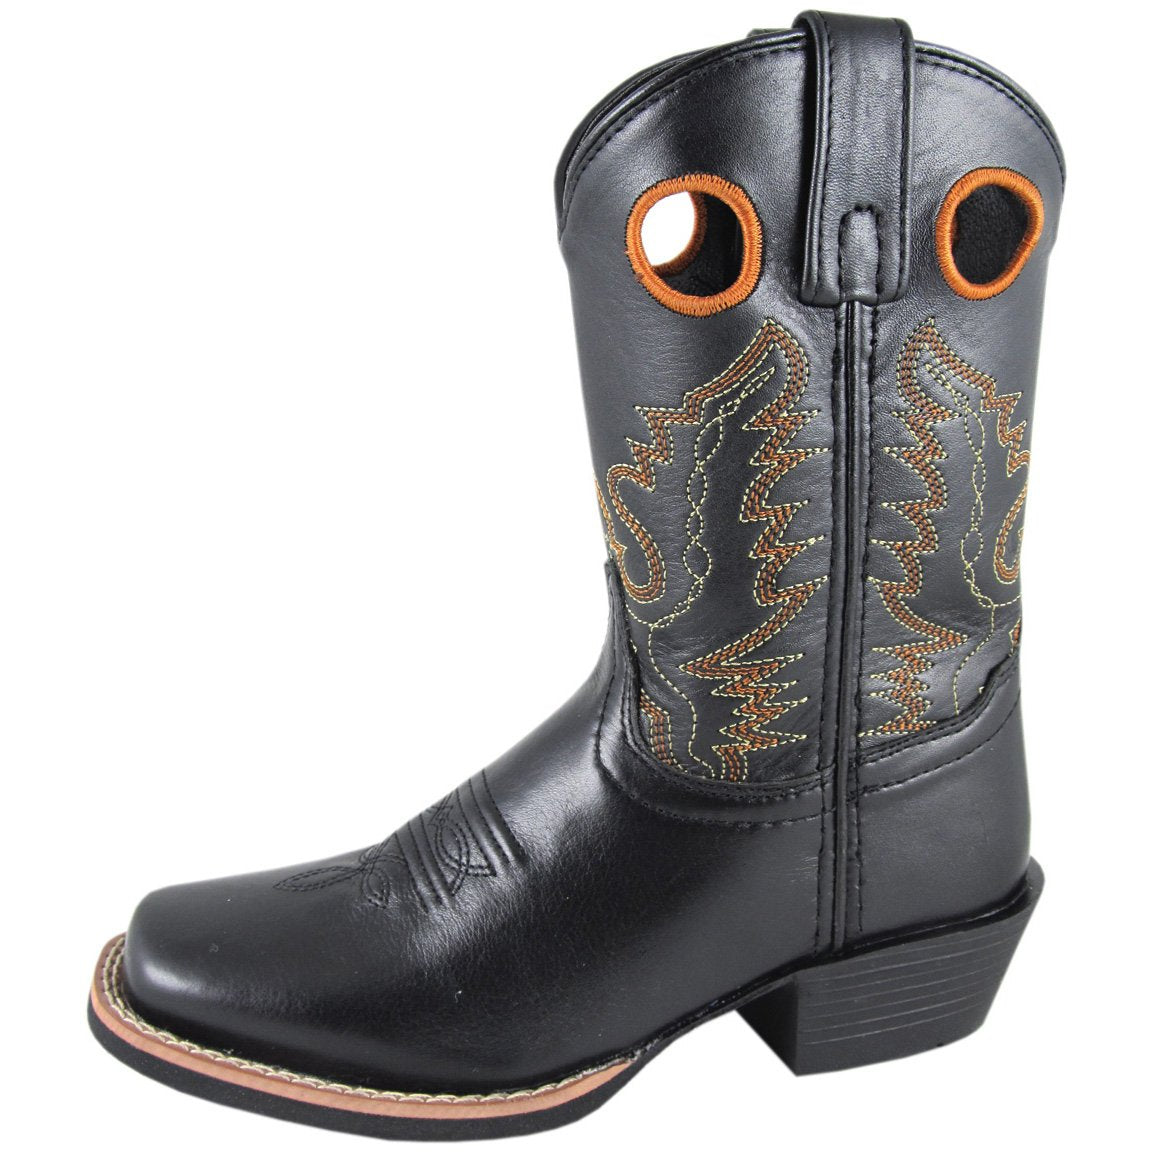 Smoky Mountain Youth Black Square Toe Boot